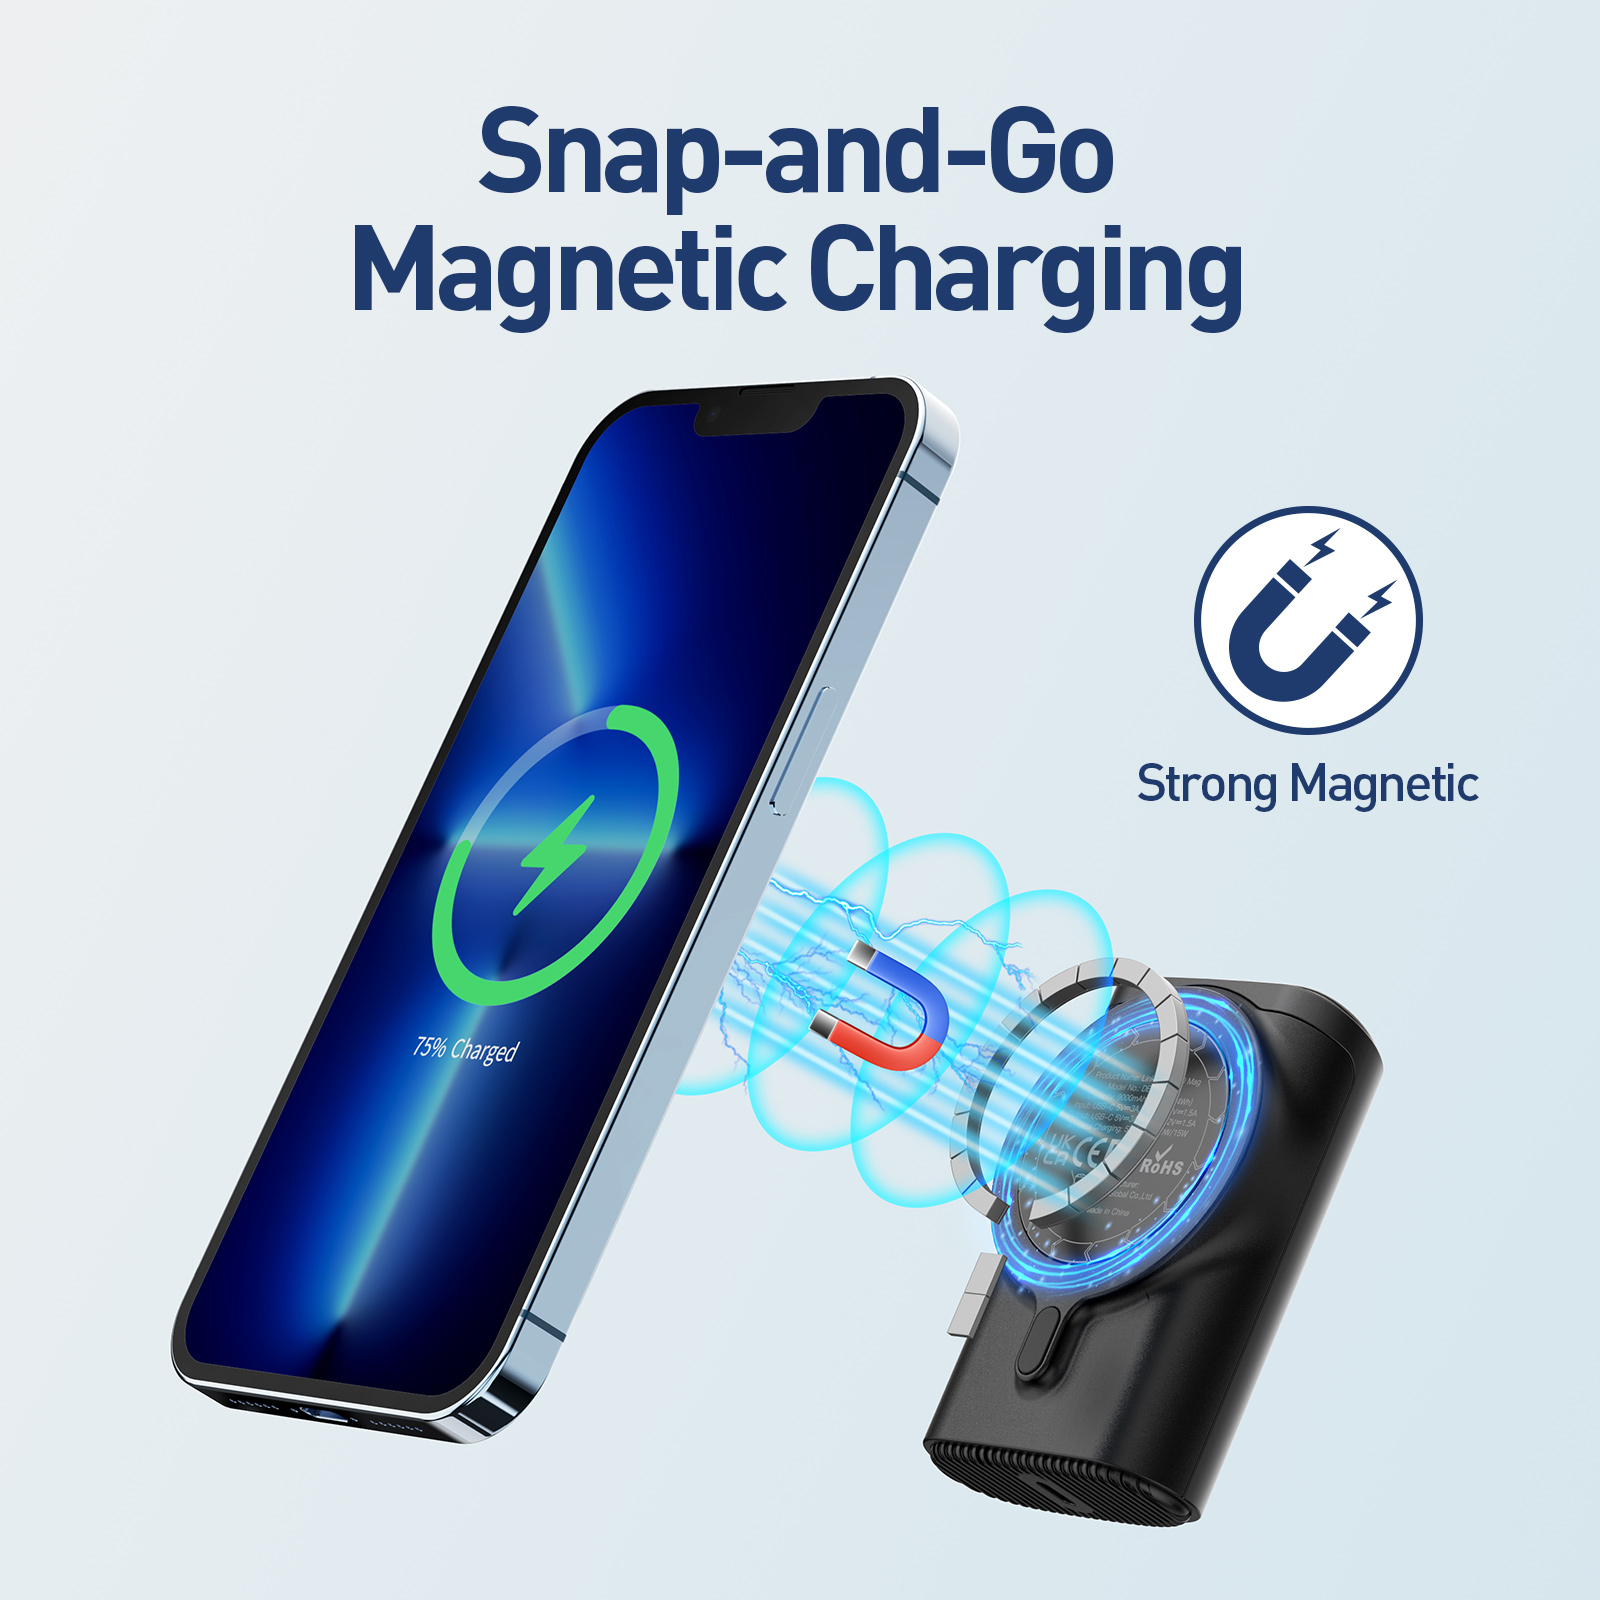 iWALK MAG-X Magnetic Wireless Power Bank with iWatch Charger,10000mAh PD  Fast Charging Portable Charger Compact Battery Pack Compatible with iPhone